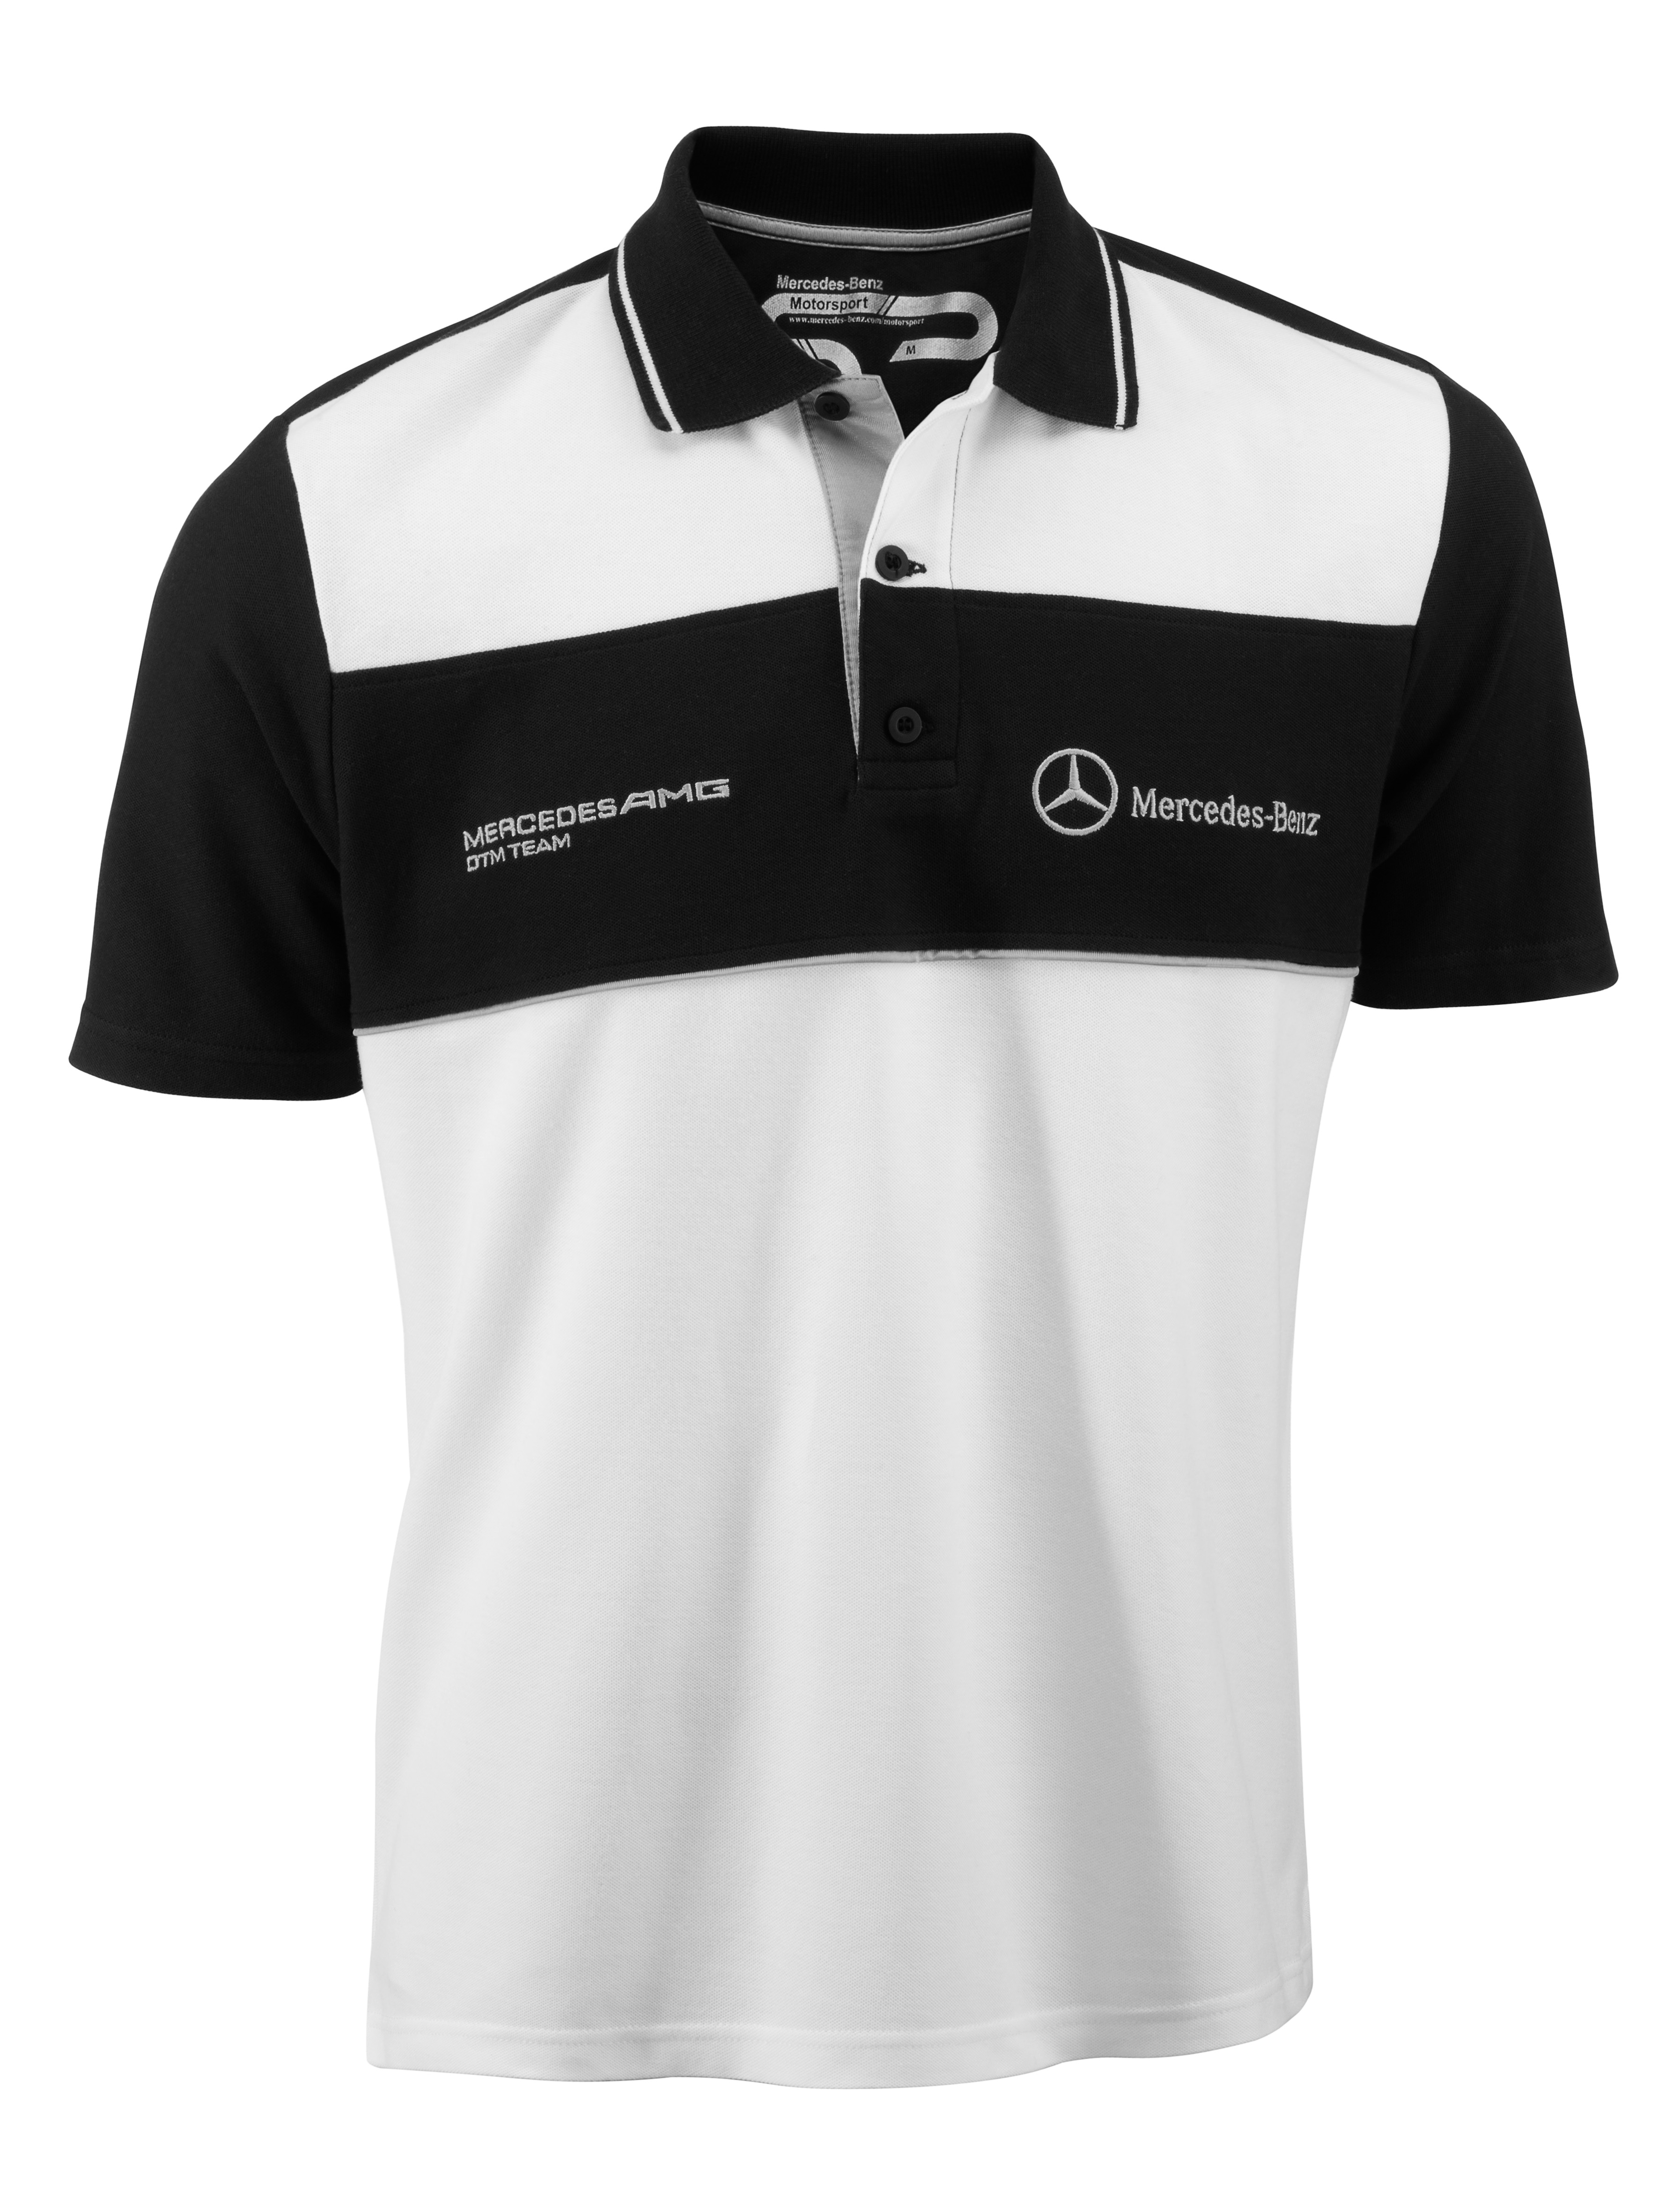 Latest Mercedes-Benz Motorsports Selection 2013 Products Unveiled